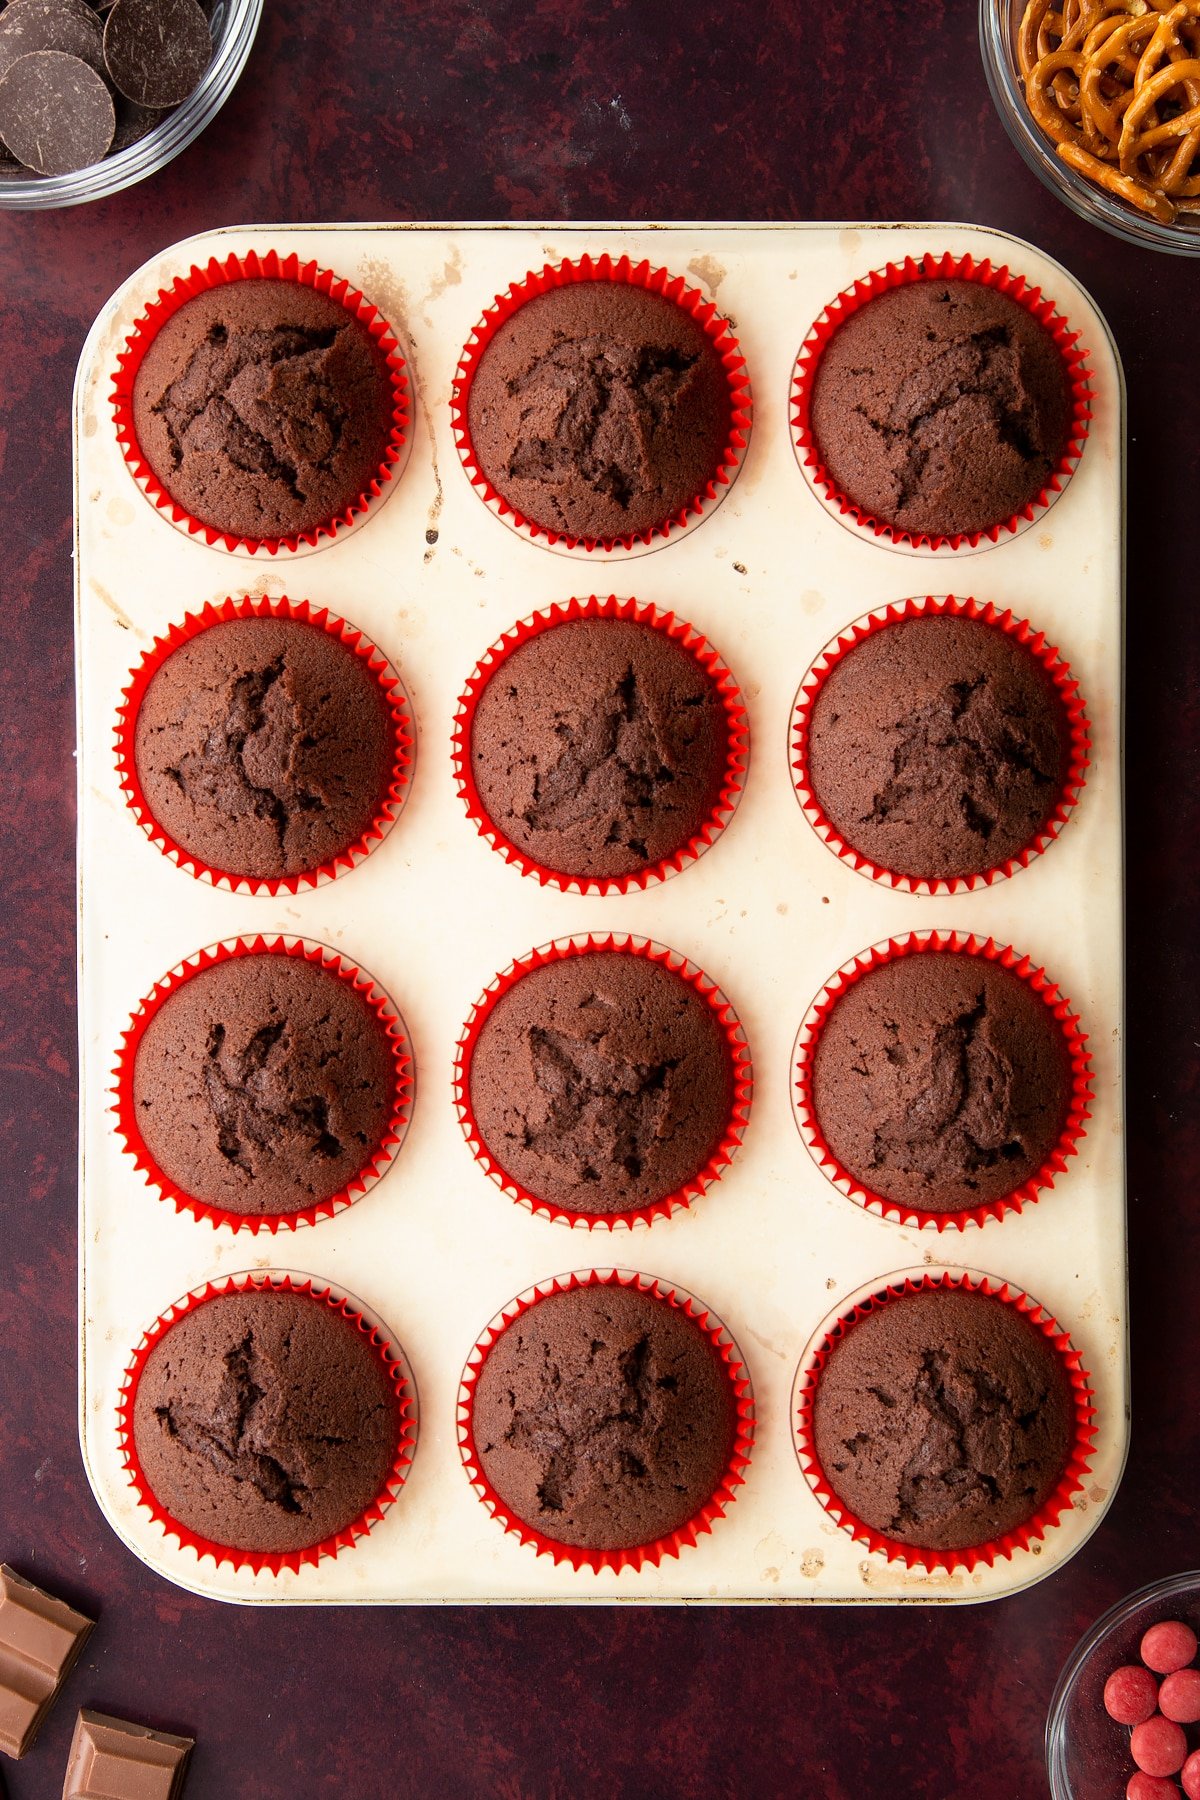 Baked chocolate cakes in red cupcake cases in a tray. Ingredients to make reindeer cupcakes surround the tray.